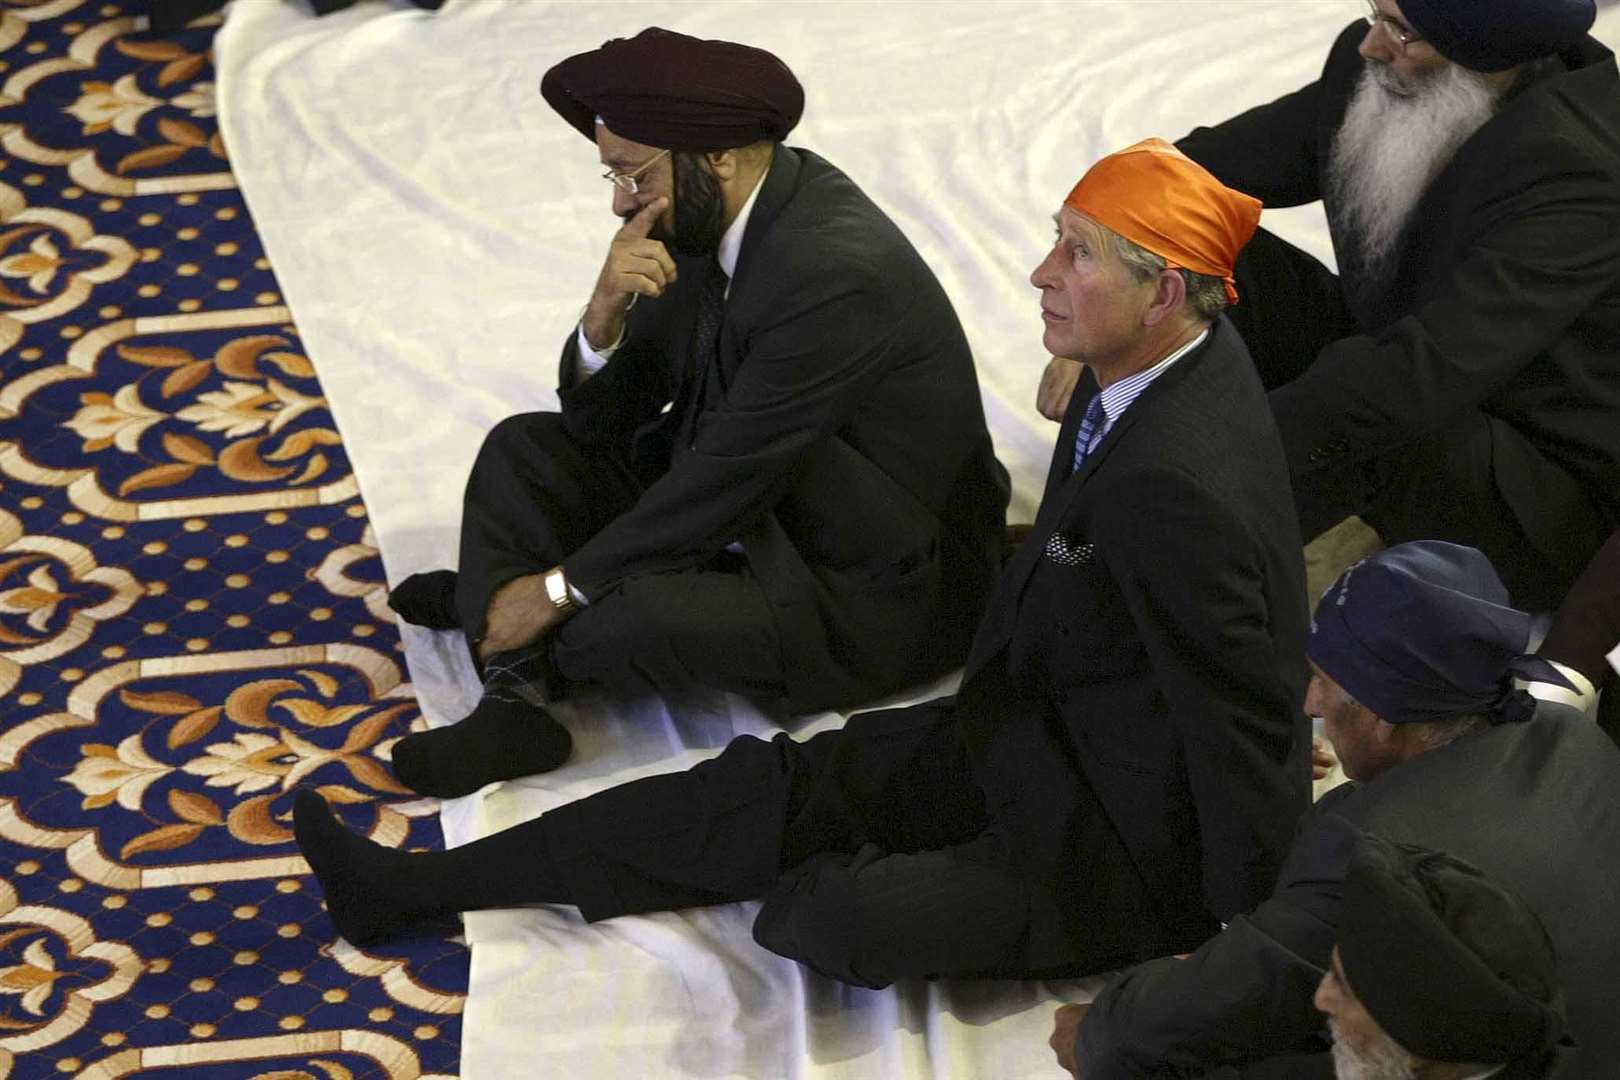 The Prince of Wales joked he found it difficult to sit on the floor while visiting the Sri Guru Singh Sabha Gurdwara Sikh Temple, in Southall, in 2003 (PA)